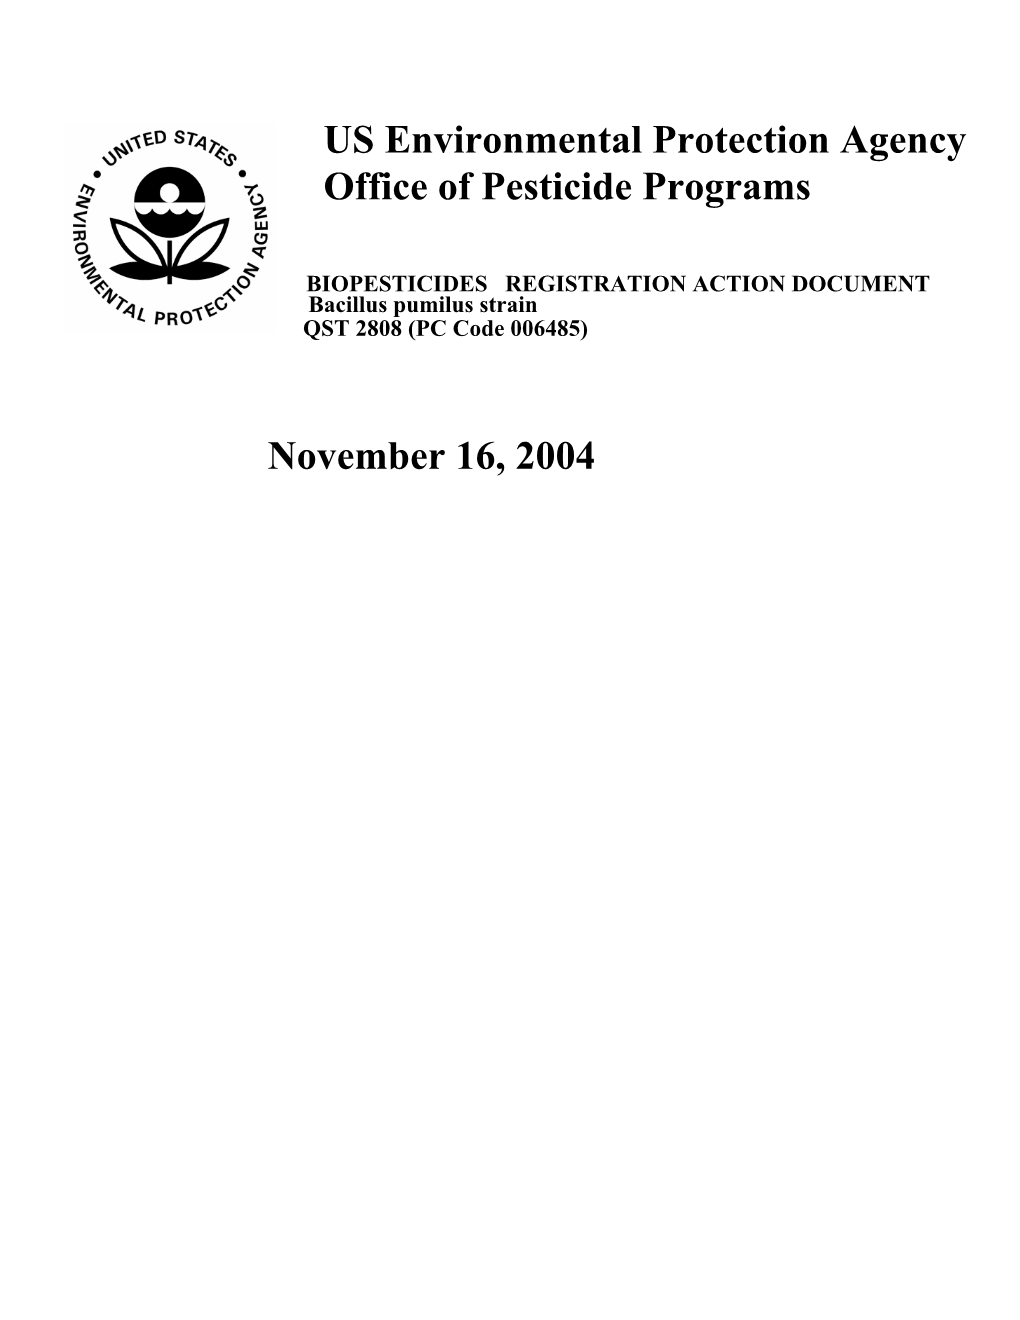 Technical Document for Bacillus Pumilus QST 2808 Also Referred To